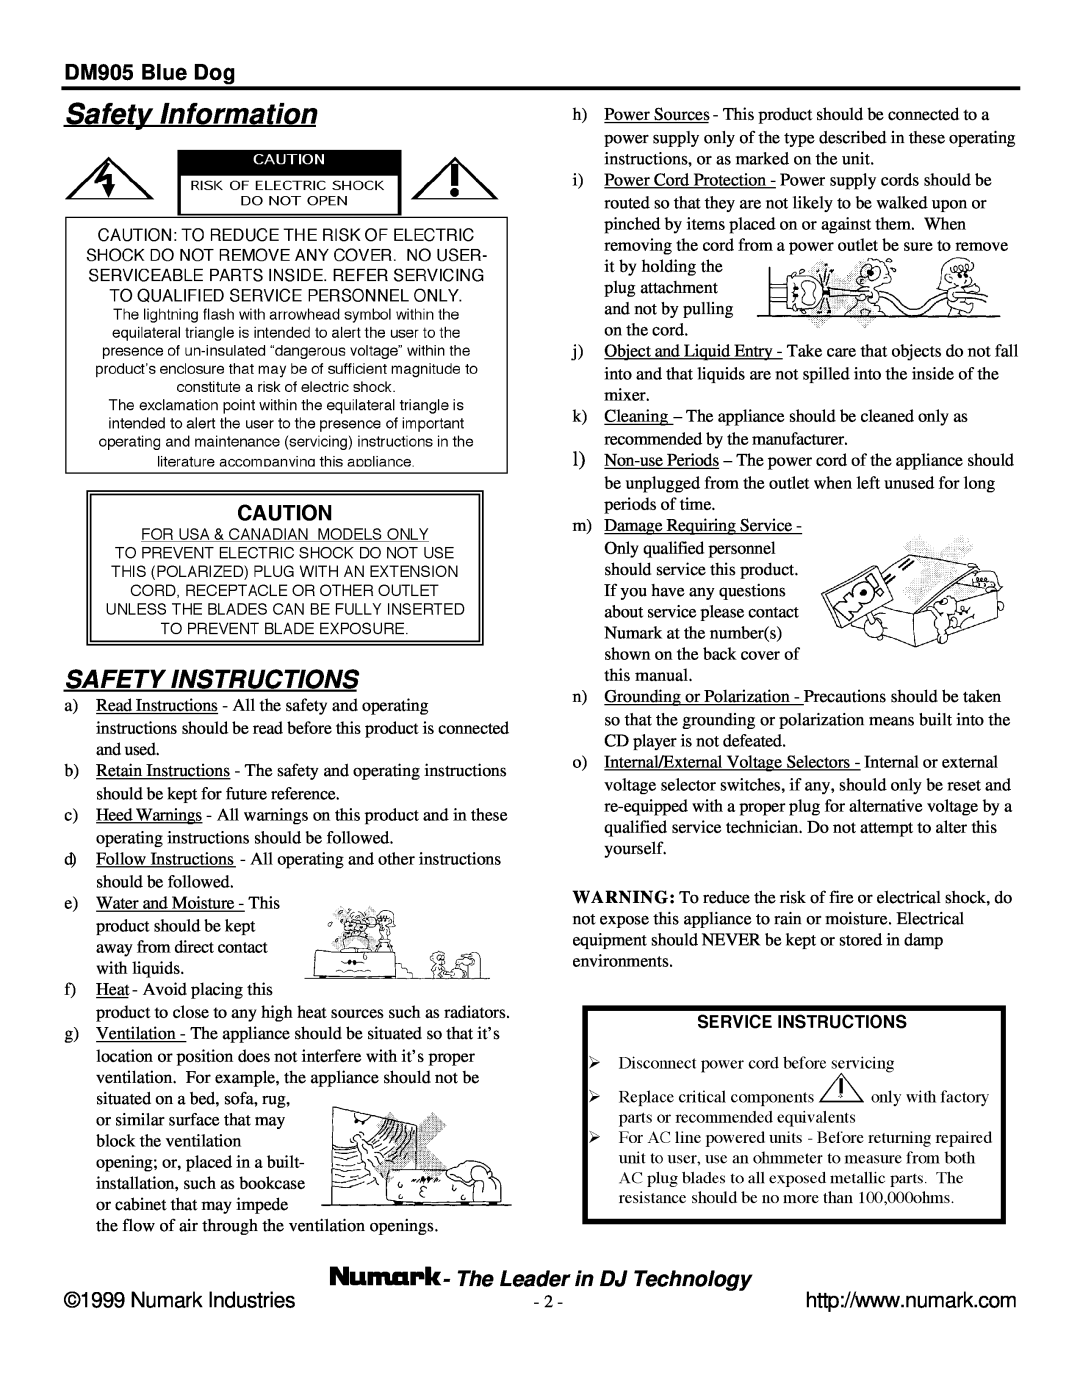 Numark Industries user manual Safety Information, Safety Instructions, DM905 Blue Dog, Numark Industries 